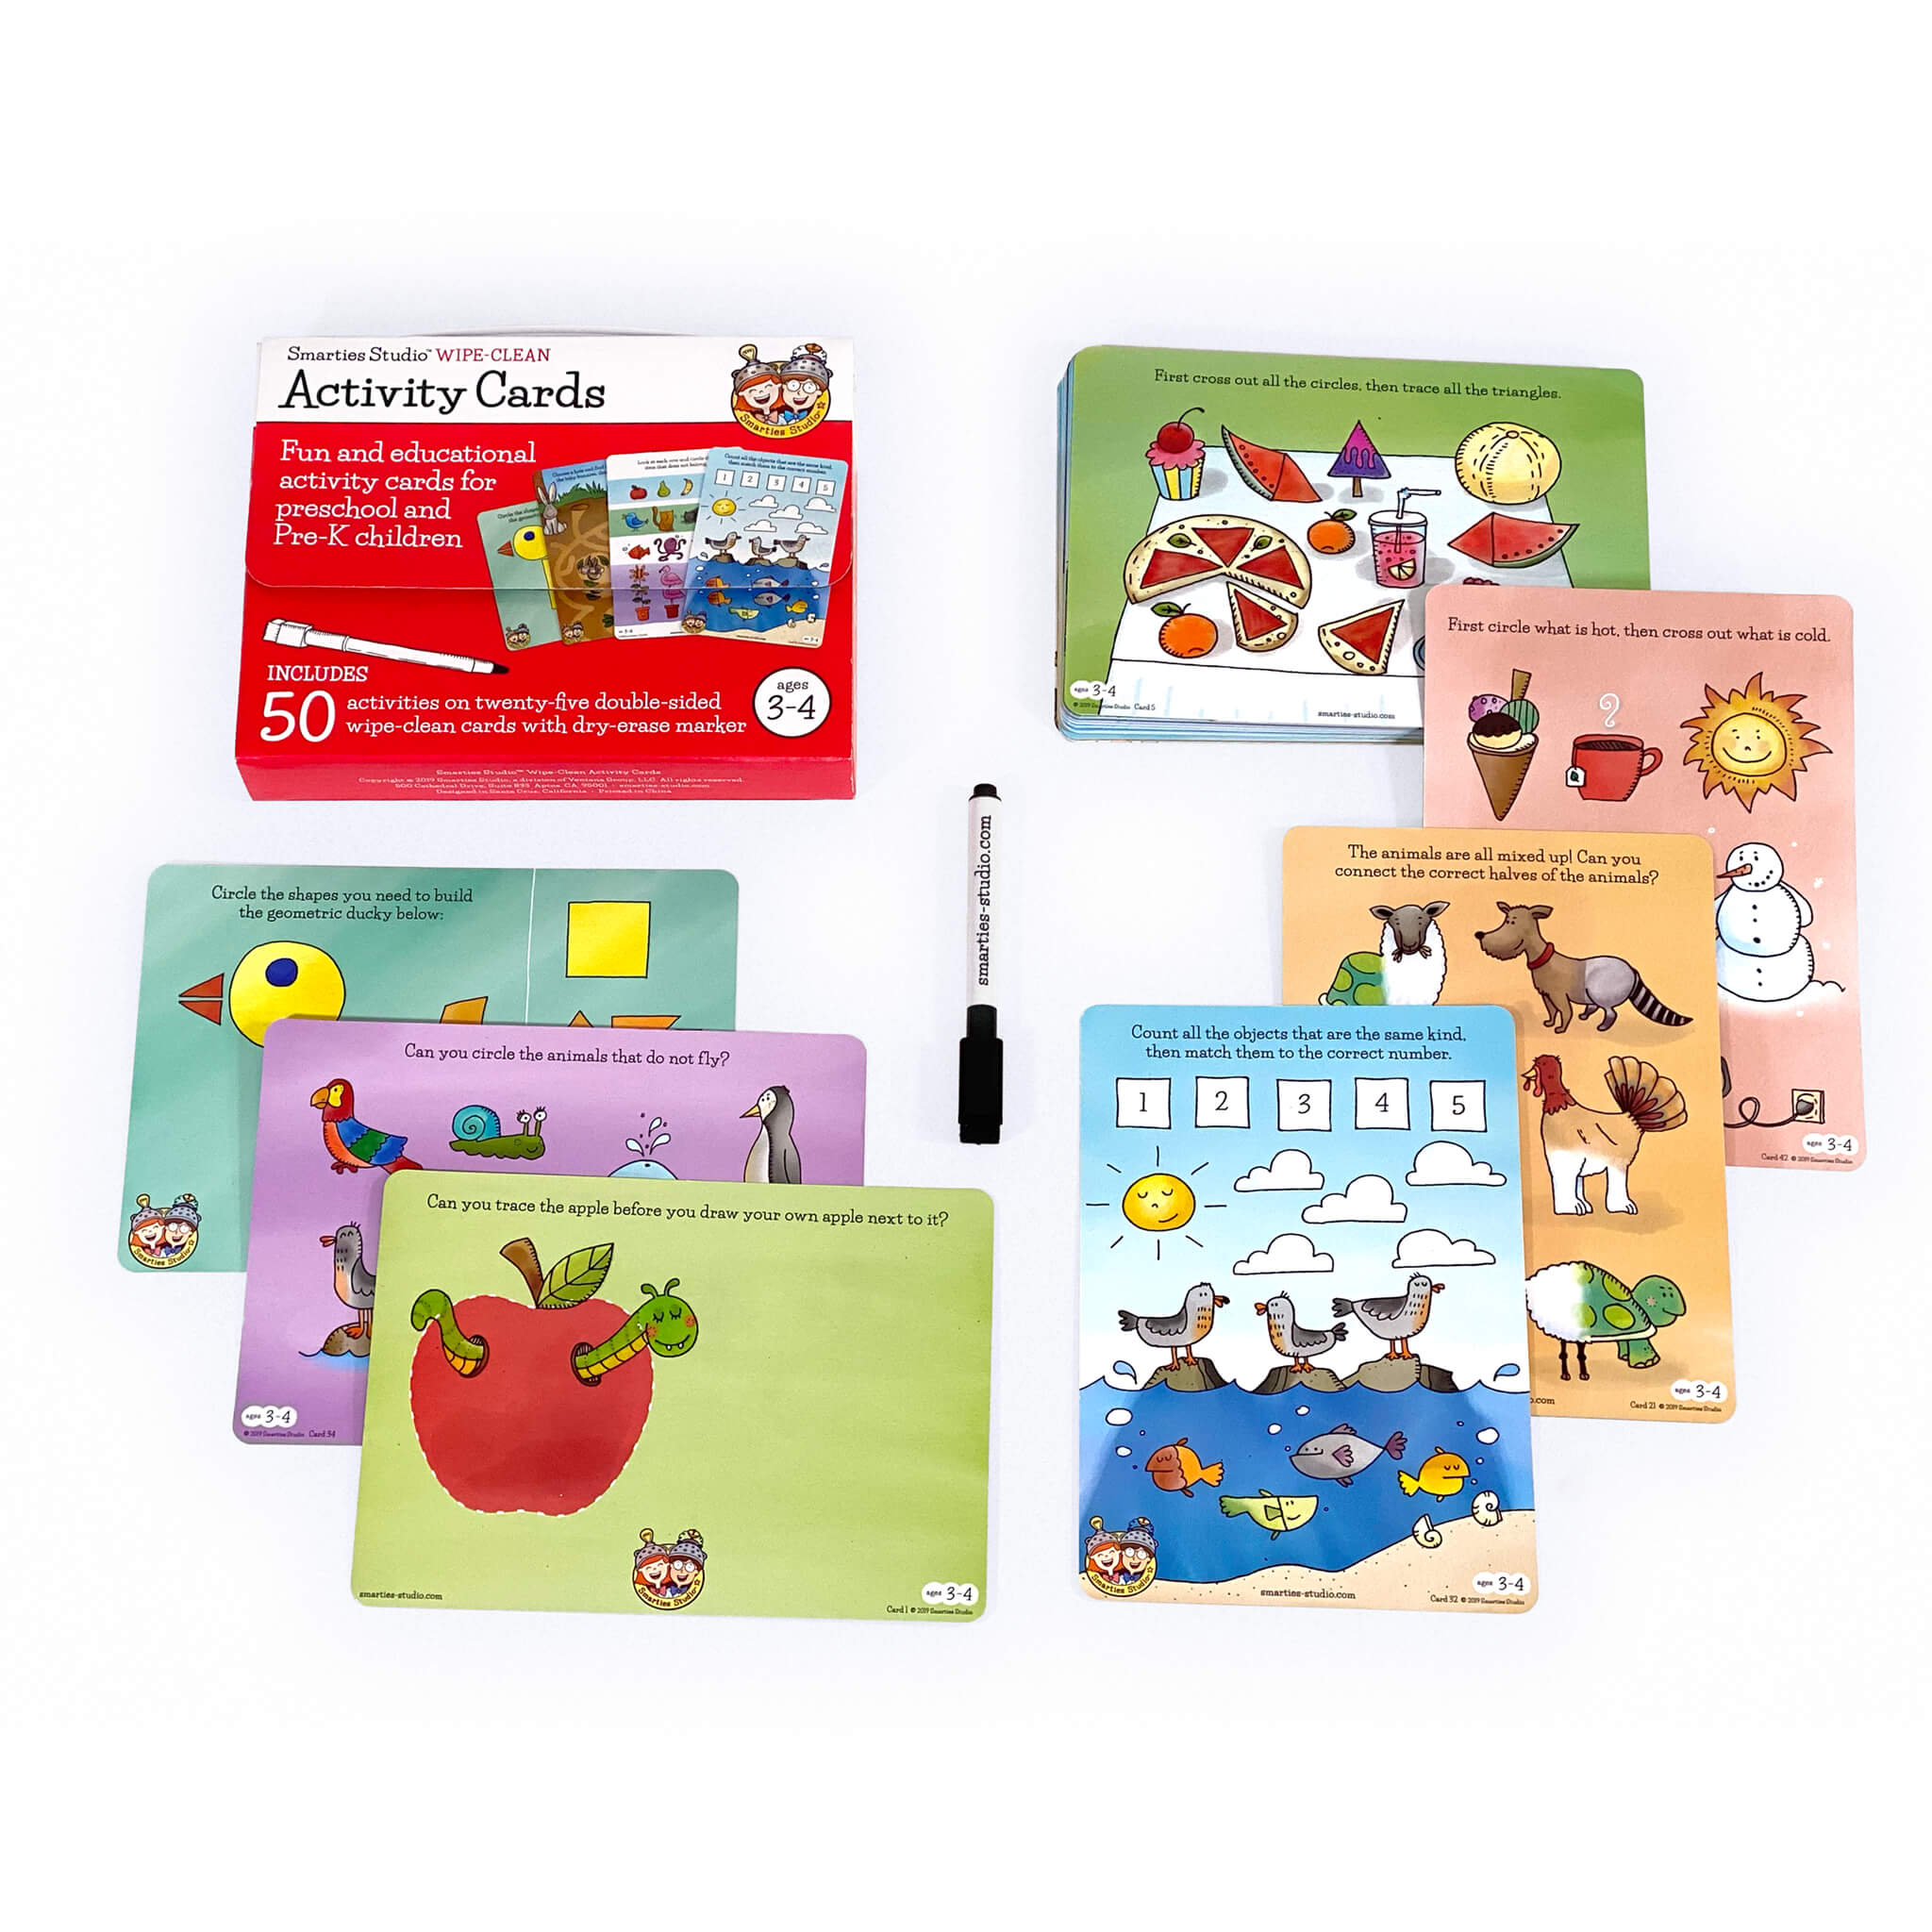 Smarties Studio Wipe Clean Activity Cards for Ages 3-4 ~ Breakout